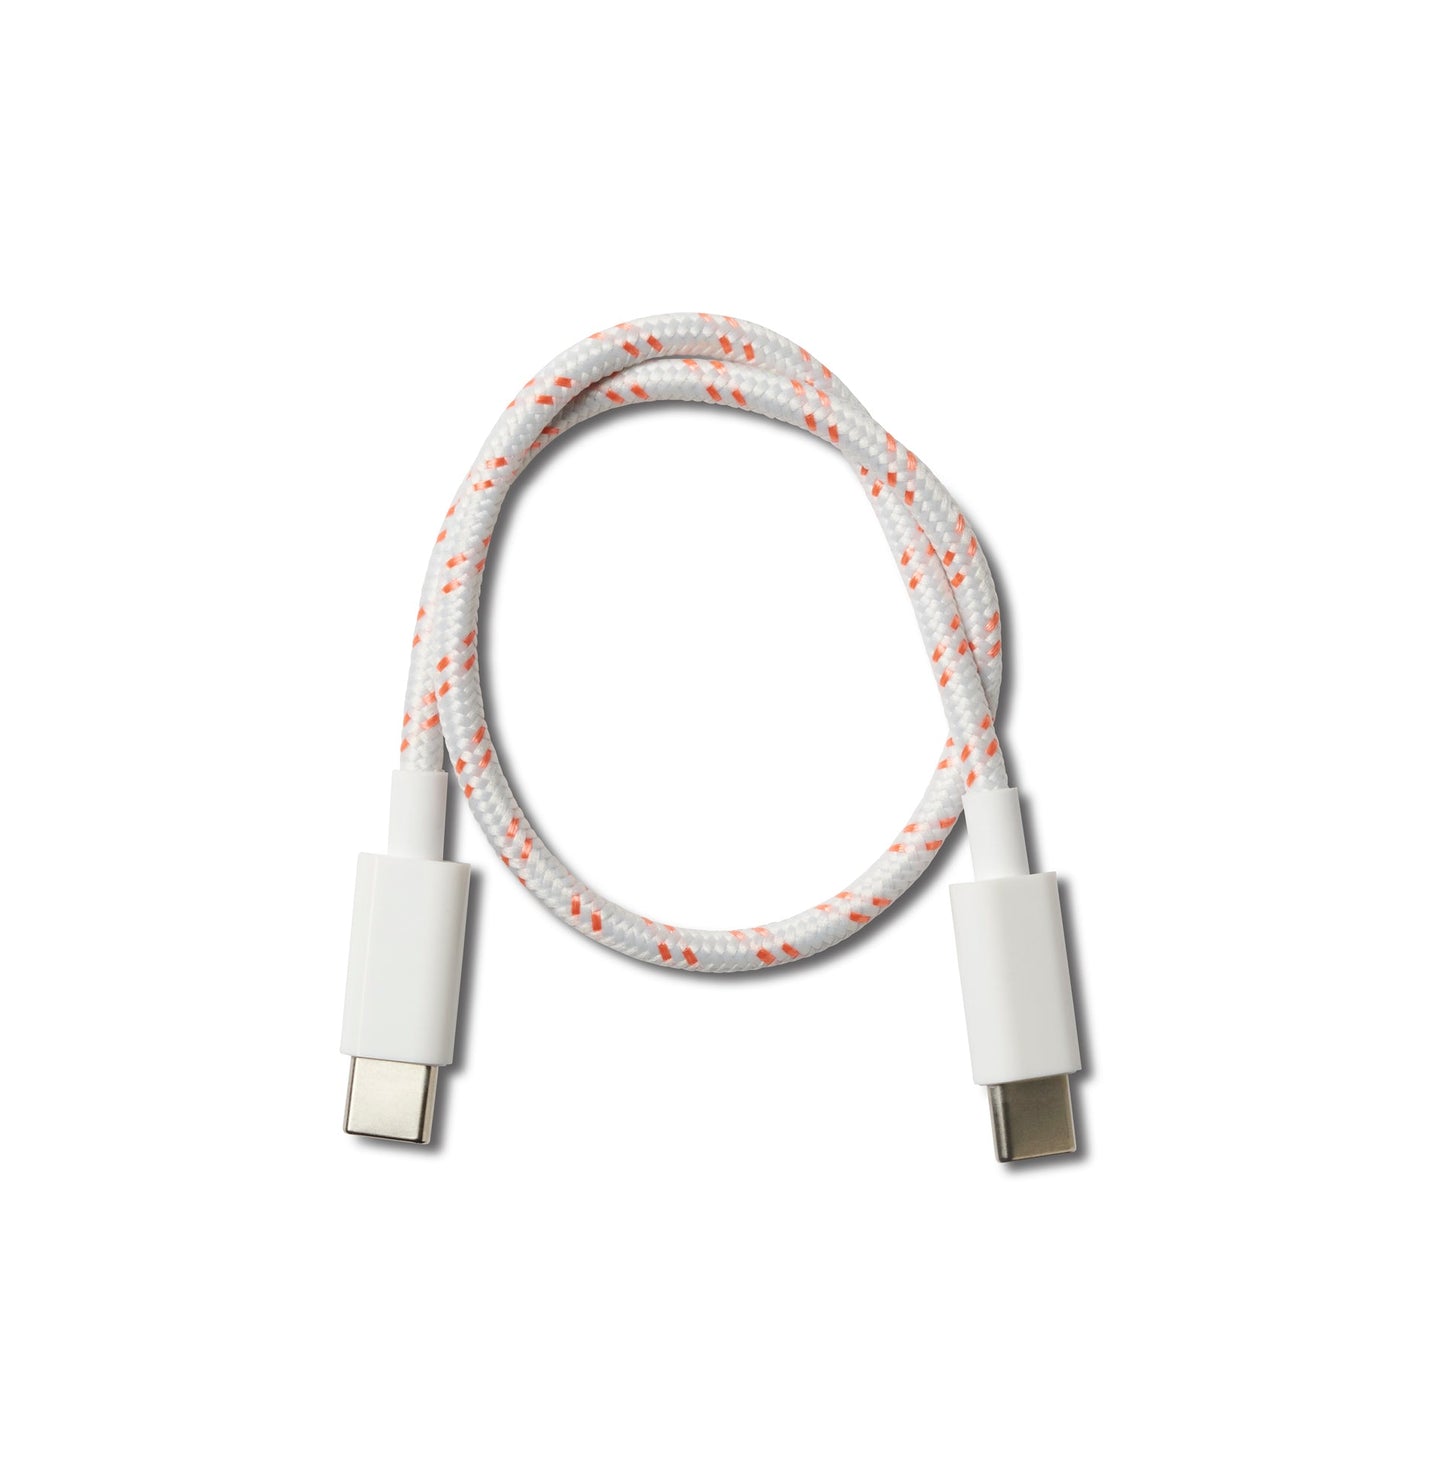 [charge] power cable - white + neon orange